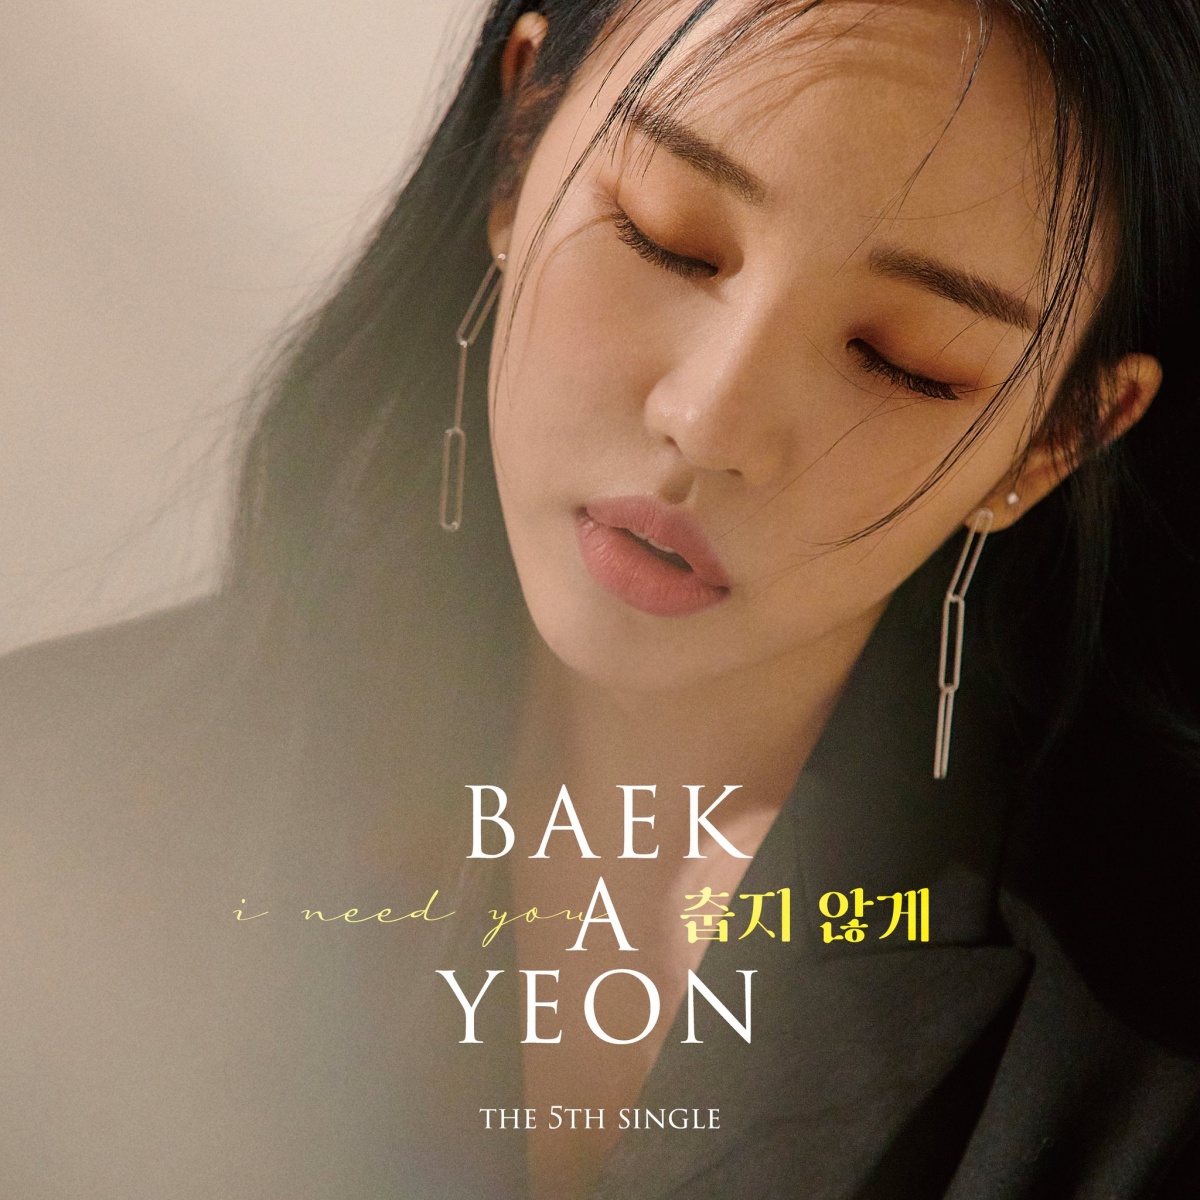 Baek A-yeon "The most important thing in music is the lyrics.. Direct, conversational lyrics touch me"